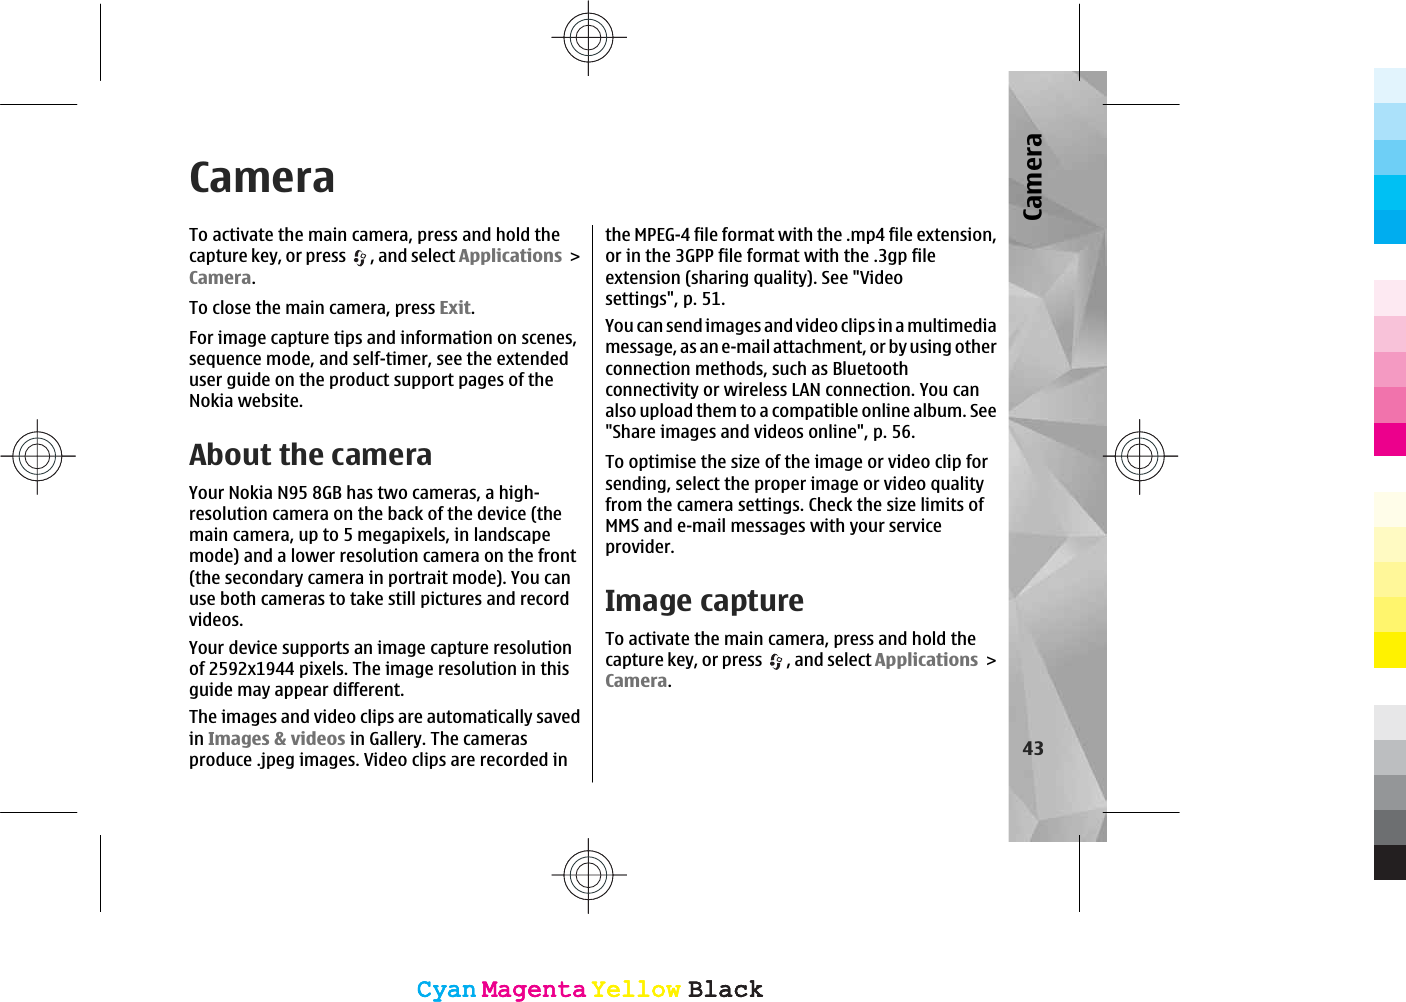 CameraTo activate the main camera, press and hold thecapture key, or press  , and select ApplicationsCamera.To close the main camera, press Exit.For image capture tips and information on scenes,sequence mode, and self-timer, see the extendeduser guide on the product support pages of theNokia website.About the cameraYour Nokia N95 8GB has two cameras, a high-resolution camera on the back of the device (themain camera, up to 5 megapixels, in landscapemode) and a lower resolution camera on the front(the secondary camera in portrait mode). You canuse both cameras to take still pictures and recordvideos.Your device supports an image capture resolutionof 2592x1944 pixels. The image resolution in thisguide may appear different.The images and video clips are automatically savedin Images &amp; videos in Gallery. The camerasproduce .jpeg images. Video clips are recorded inthe MPEG-4 file format with the .mp4 file extension,or in the 3GPP file format with the .3gp fileextension (sharing quality). See &quot;Videosettings&quot;, p. 51.You can send images and video clips in a multimediamessage, as an e-mail attachment, or by using otherconnection methods, such as Bluetoothconnectivity or wireless LAN connection. You canalso upload them to a compatible online album. See&quot;Share images and videos online&quot;, p. 56.To optimise the size of the image or video clip forsending, select the proper image or video qualityfrom the camera settings. Check the size limits ofMMS and e-mail messages with your serviceprovider.Image captureTo activate the main camera, press and hold thecapture key, or press  , and select ApplicationsCamera.43CameraCyanCyanMagentaMagentaYellowYellowBlackBlackCyanCyanMagentaMagentaYellowYellowBlackBlack